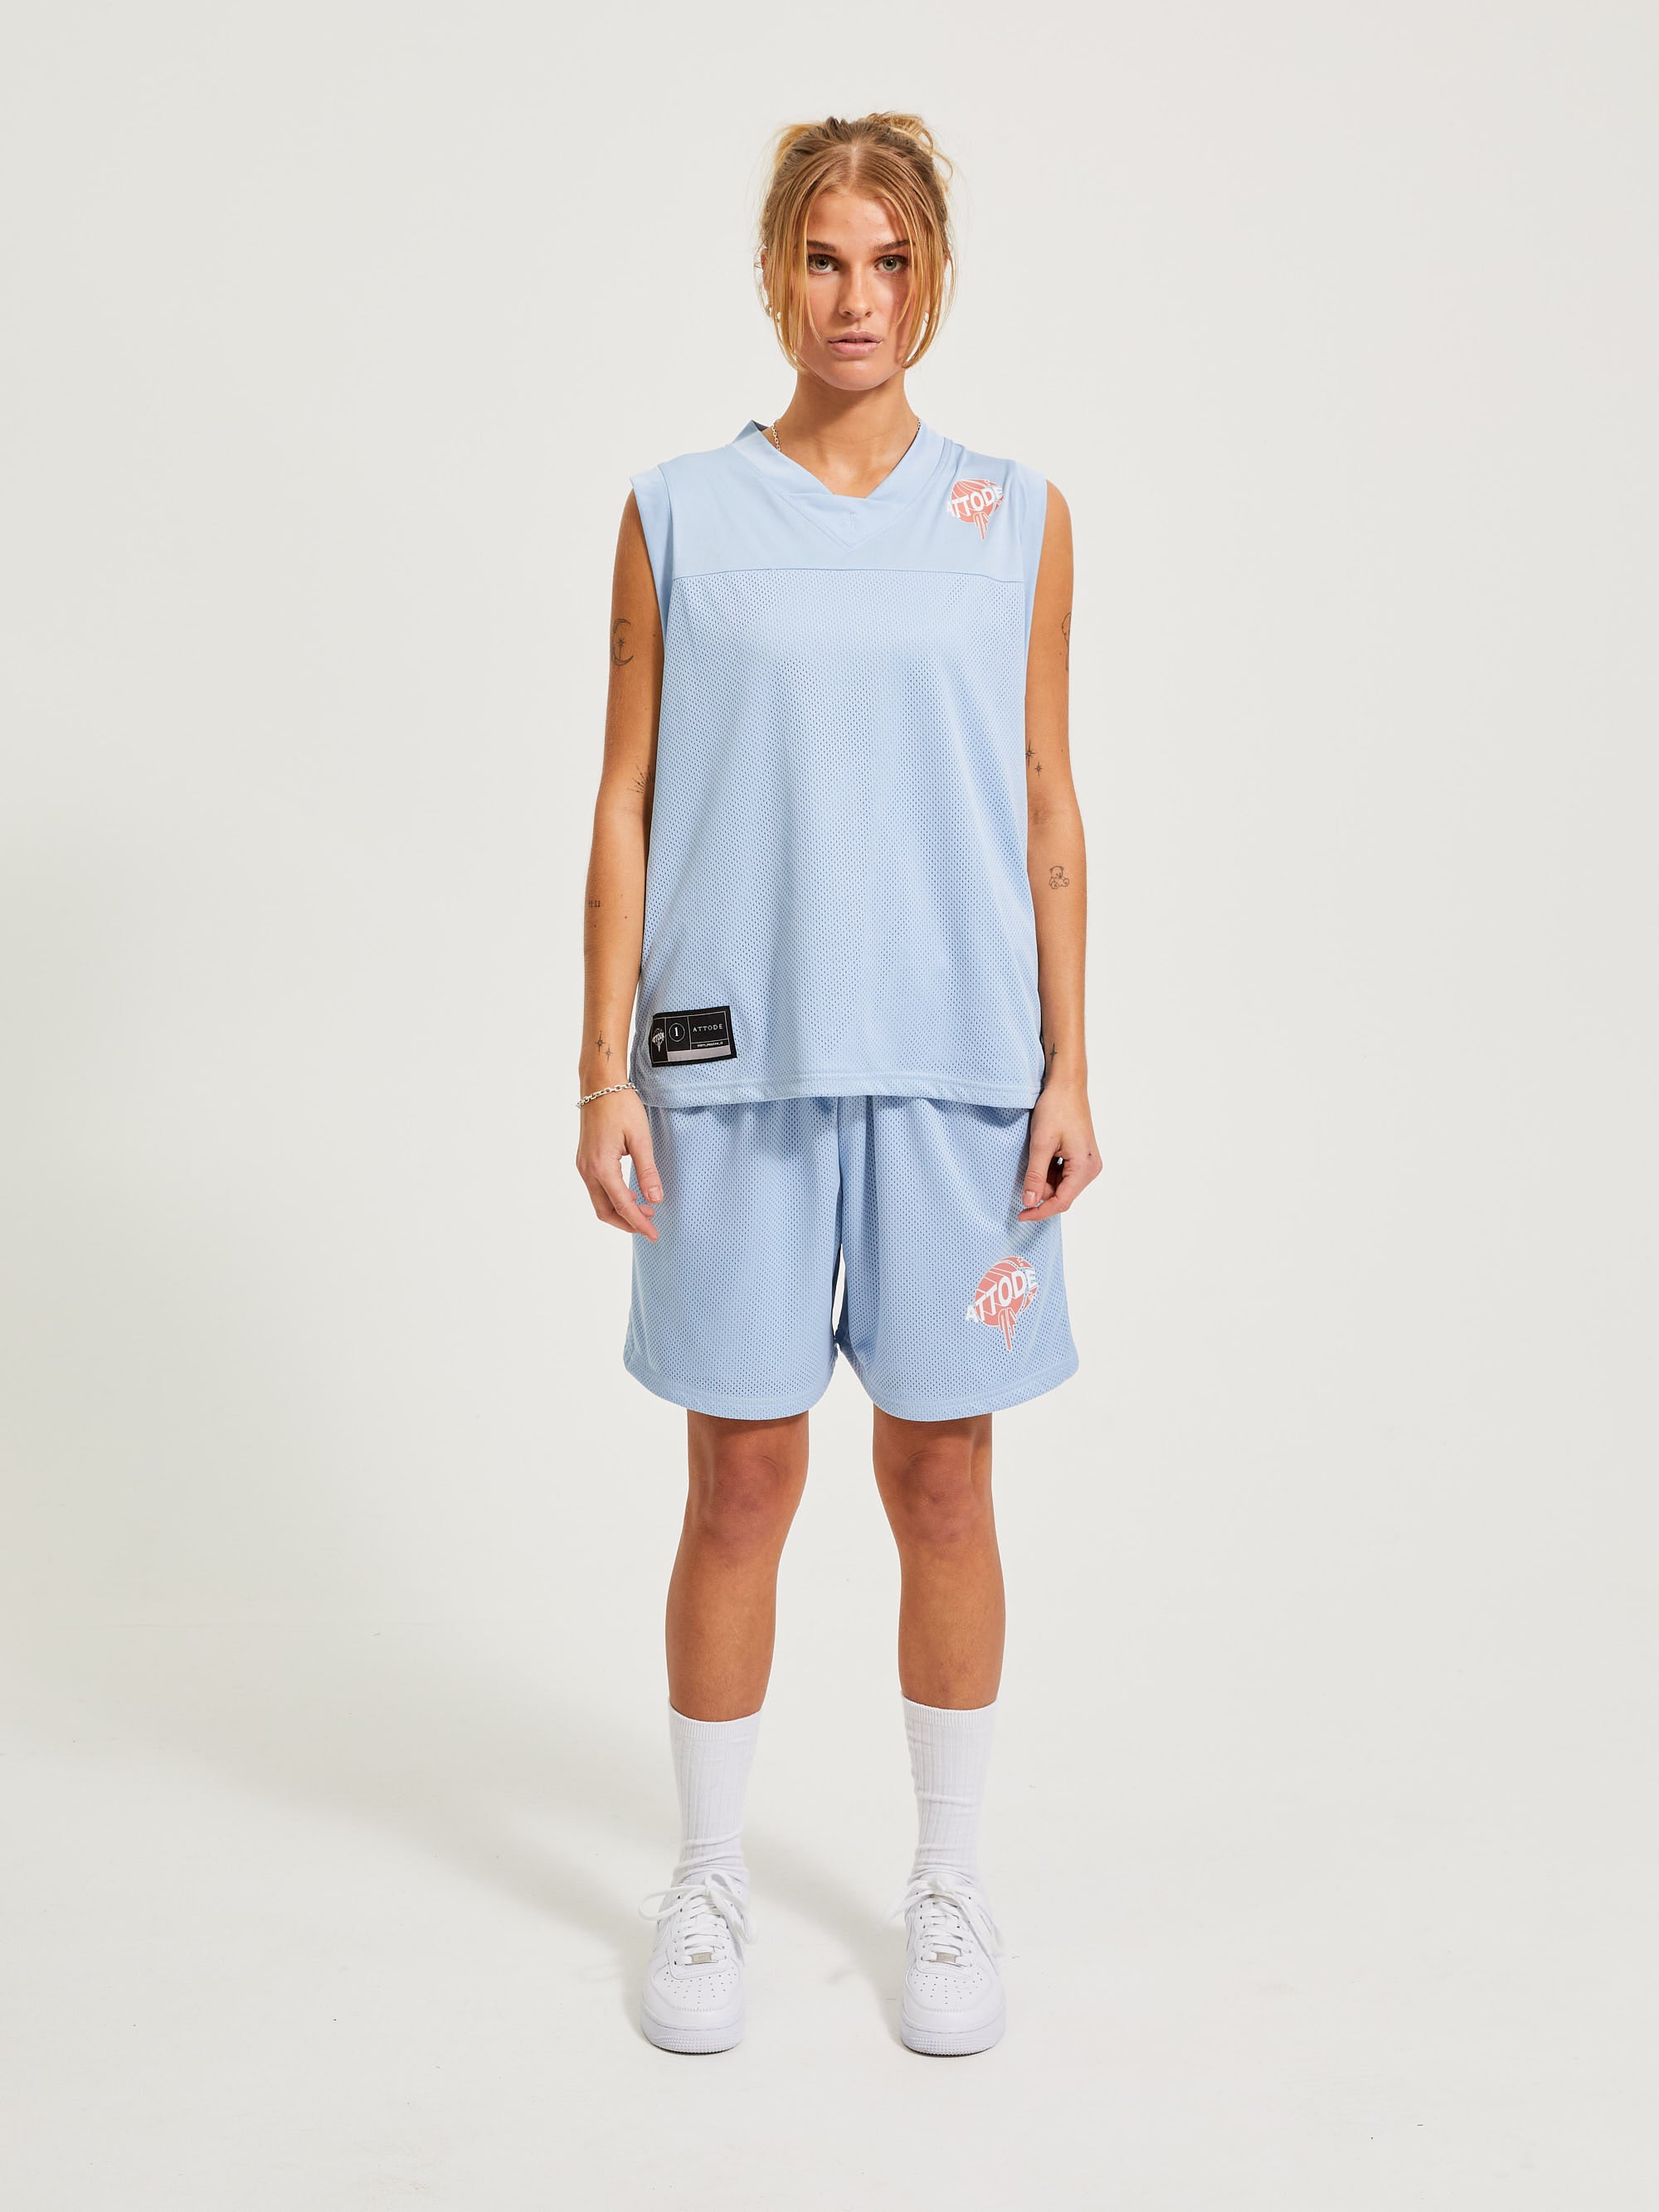 CASUAL SPORTS TANK TOP BABY BLUE - ATTODE